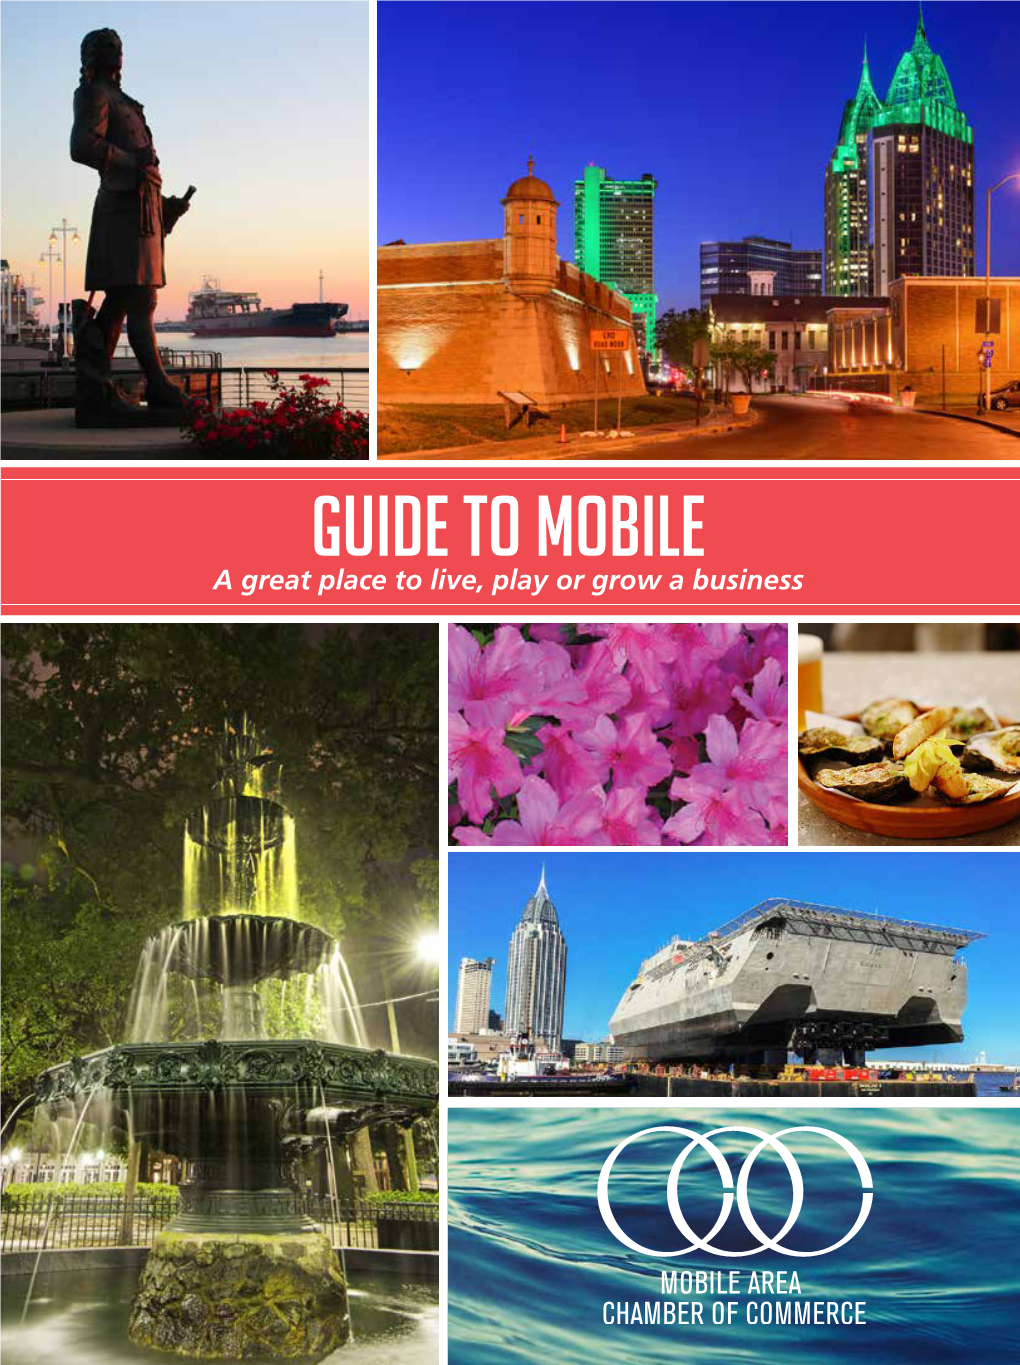 2017 Guide to Mobile Mobile Is a Great Place to Live, Play, Raise a Family and Grow a Business